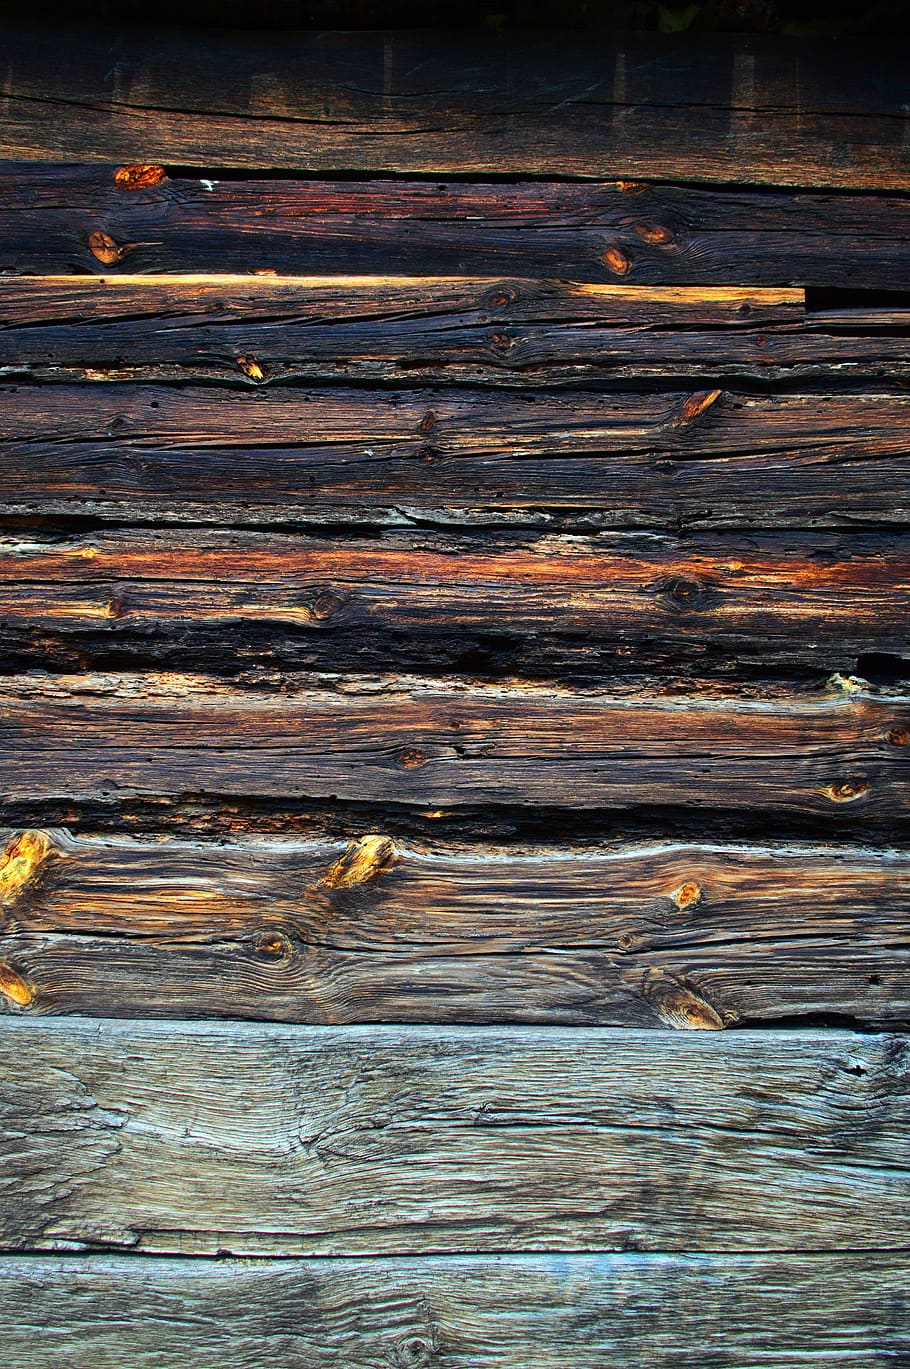 old, wood, dirty, rotten, brown, weathered, antique, structure, rustic, decomposition